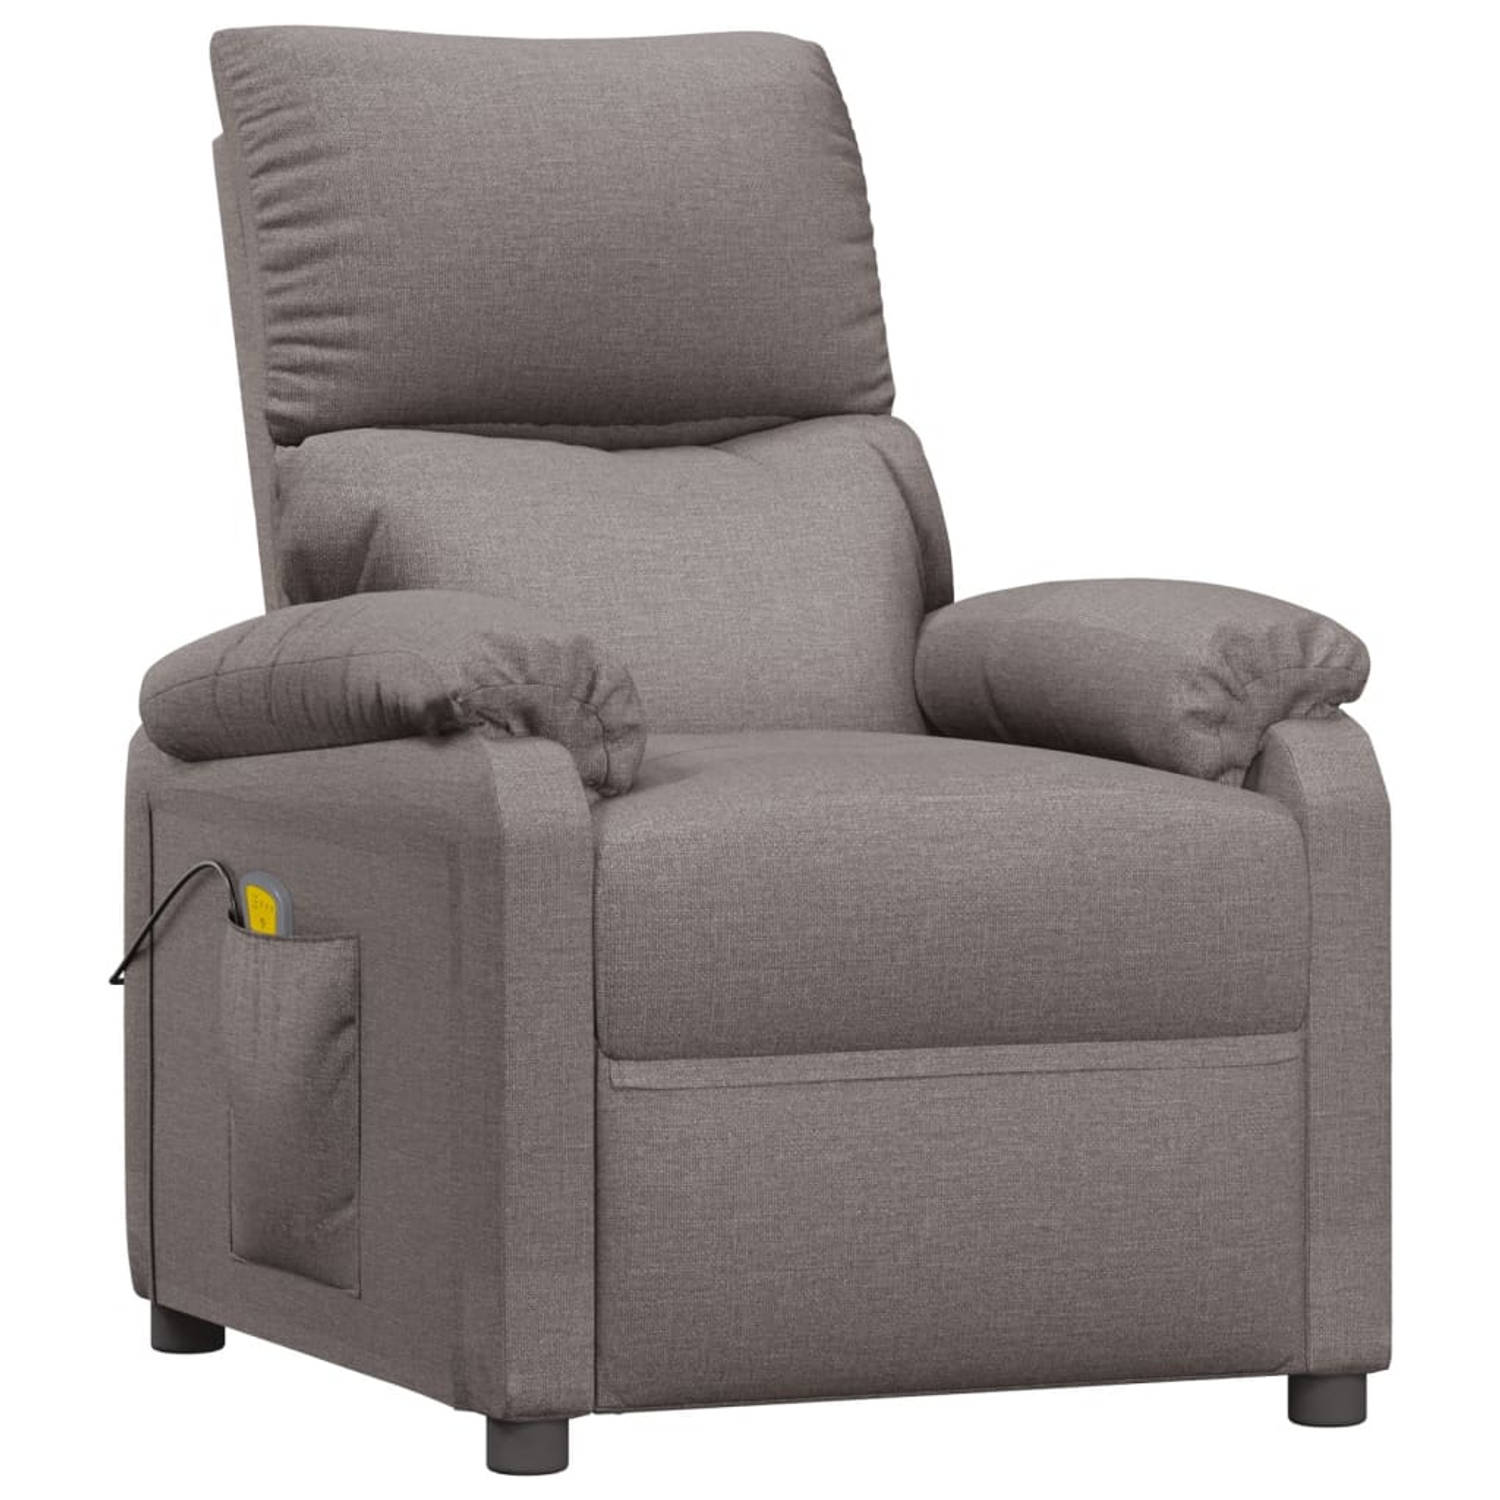 The Living Store Massagestoel stof taupe - Fauteuil